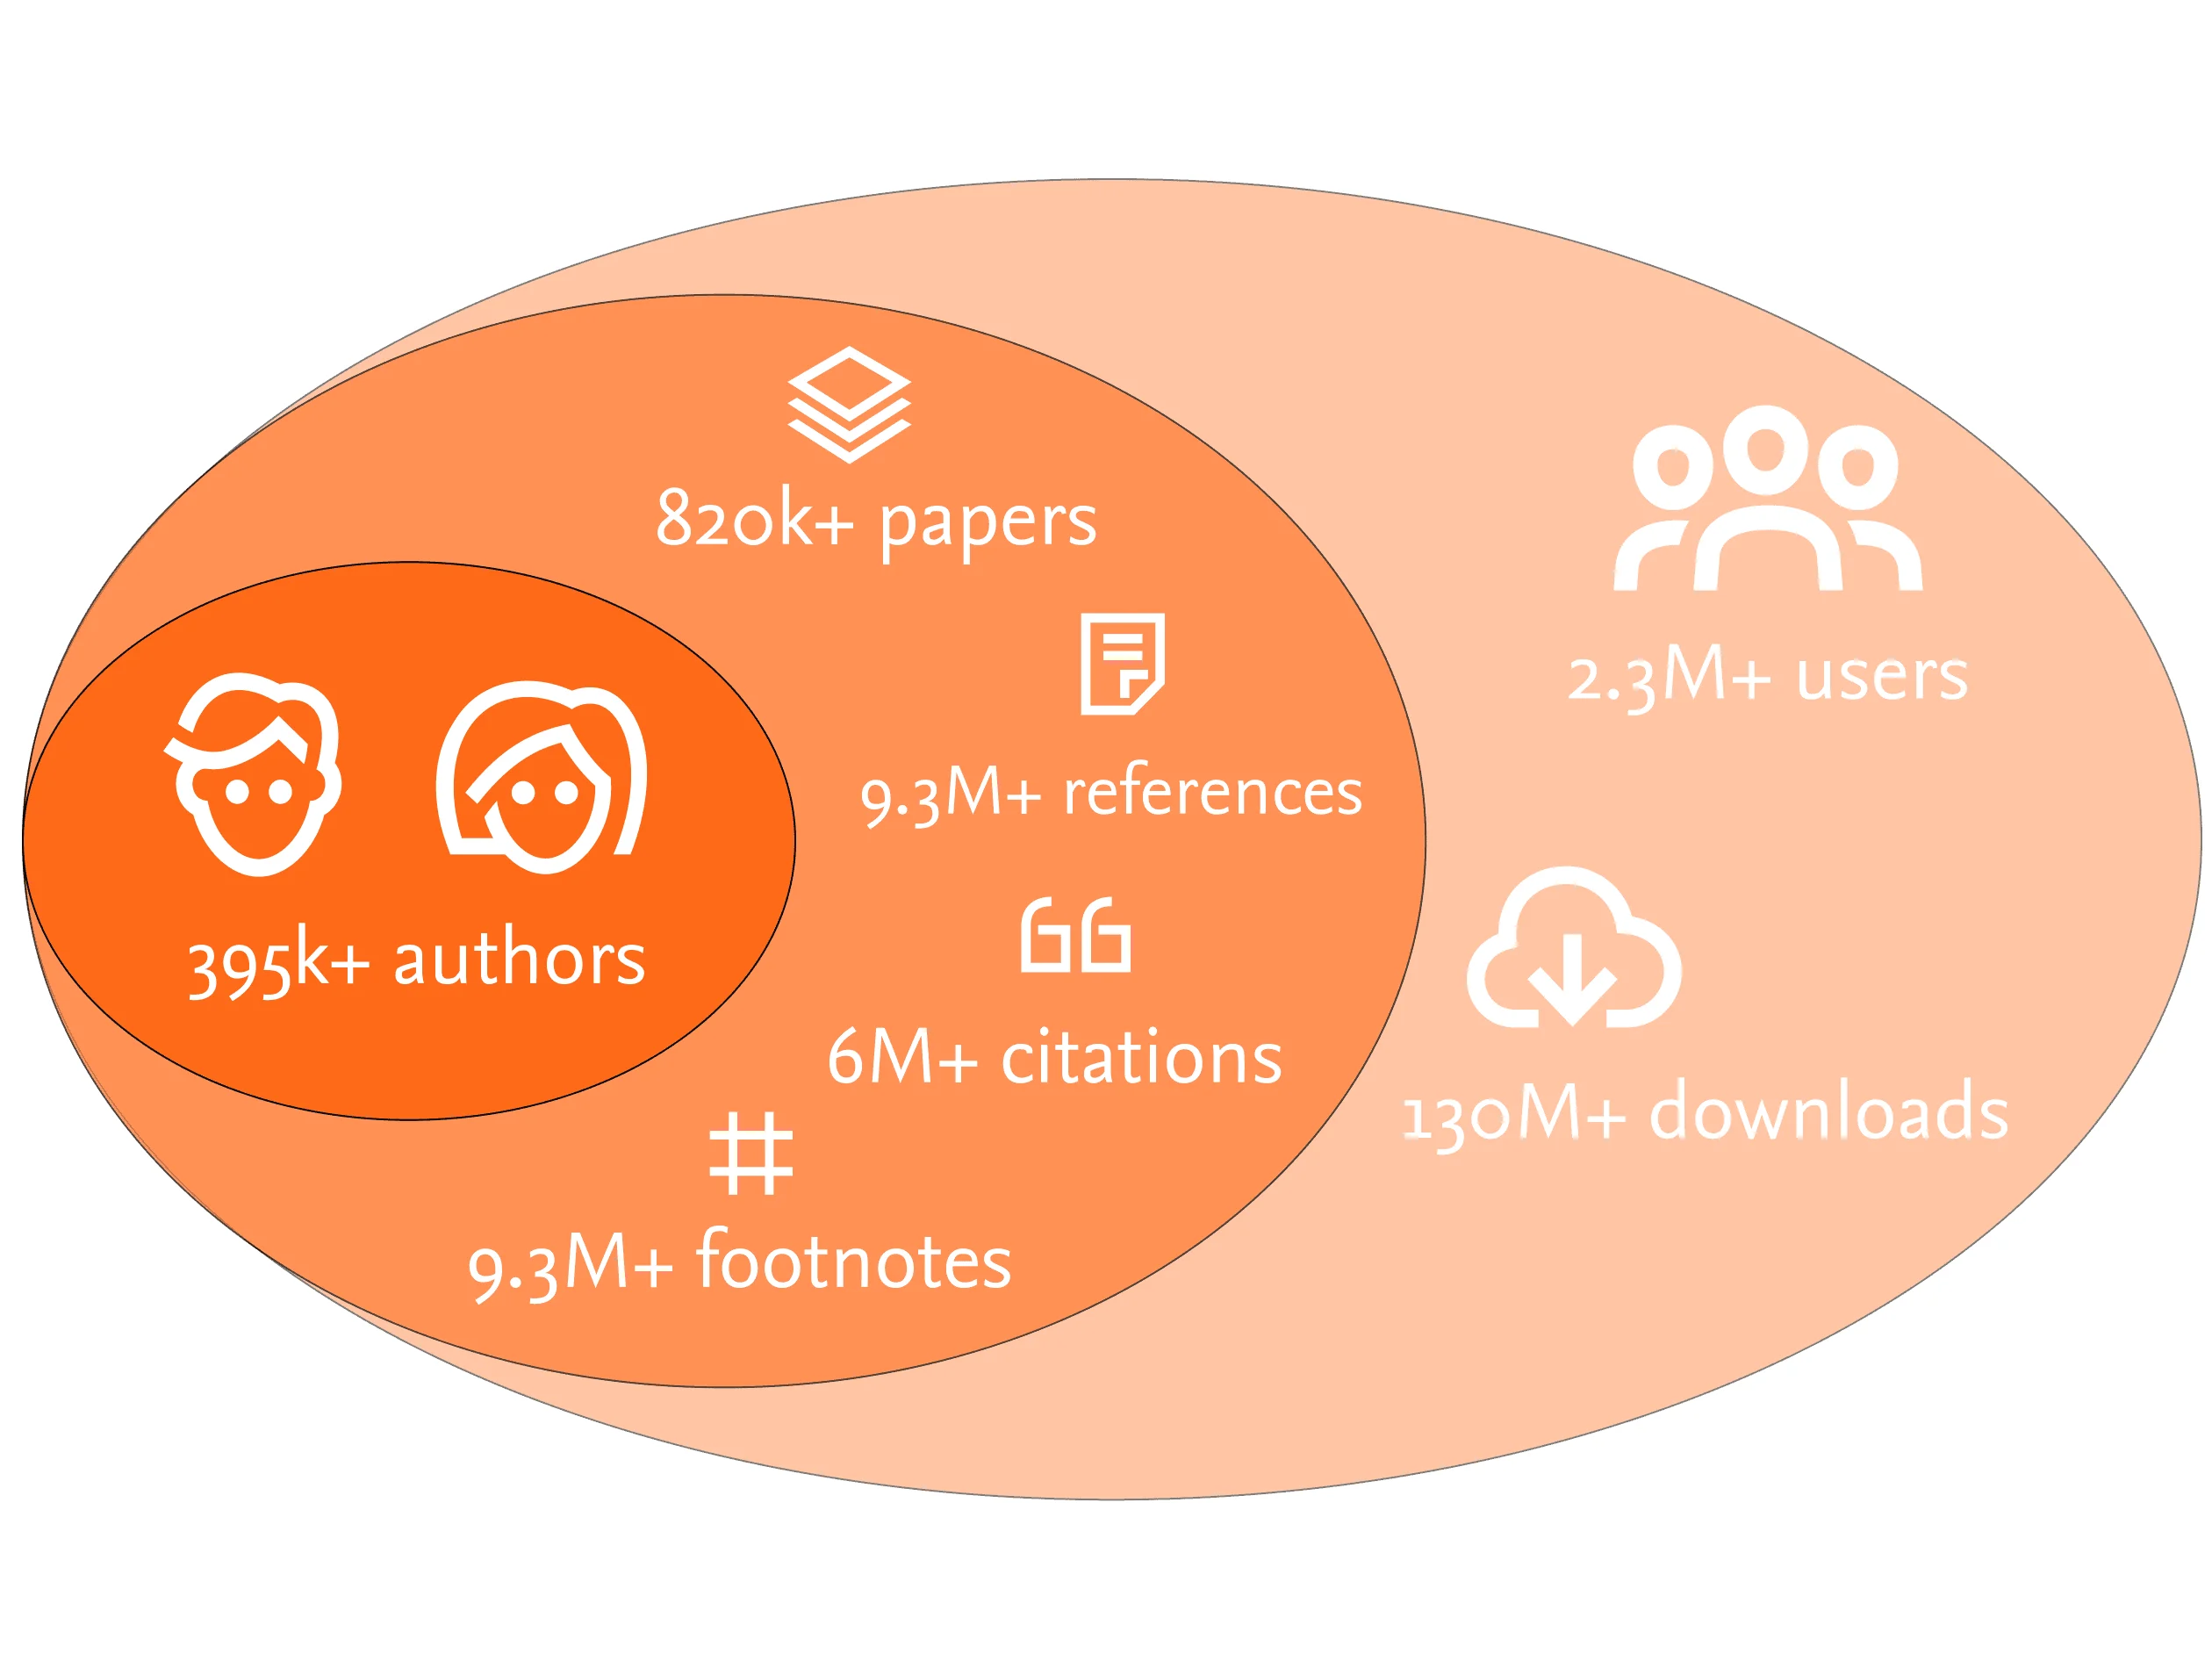 Illustration showing SSRN data on authors, papers, references, citations, footnotes, users and downloads